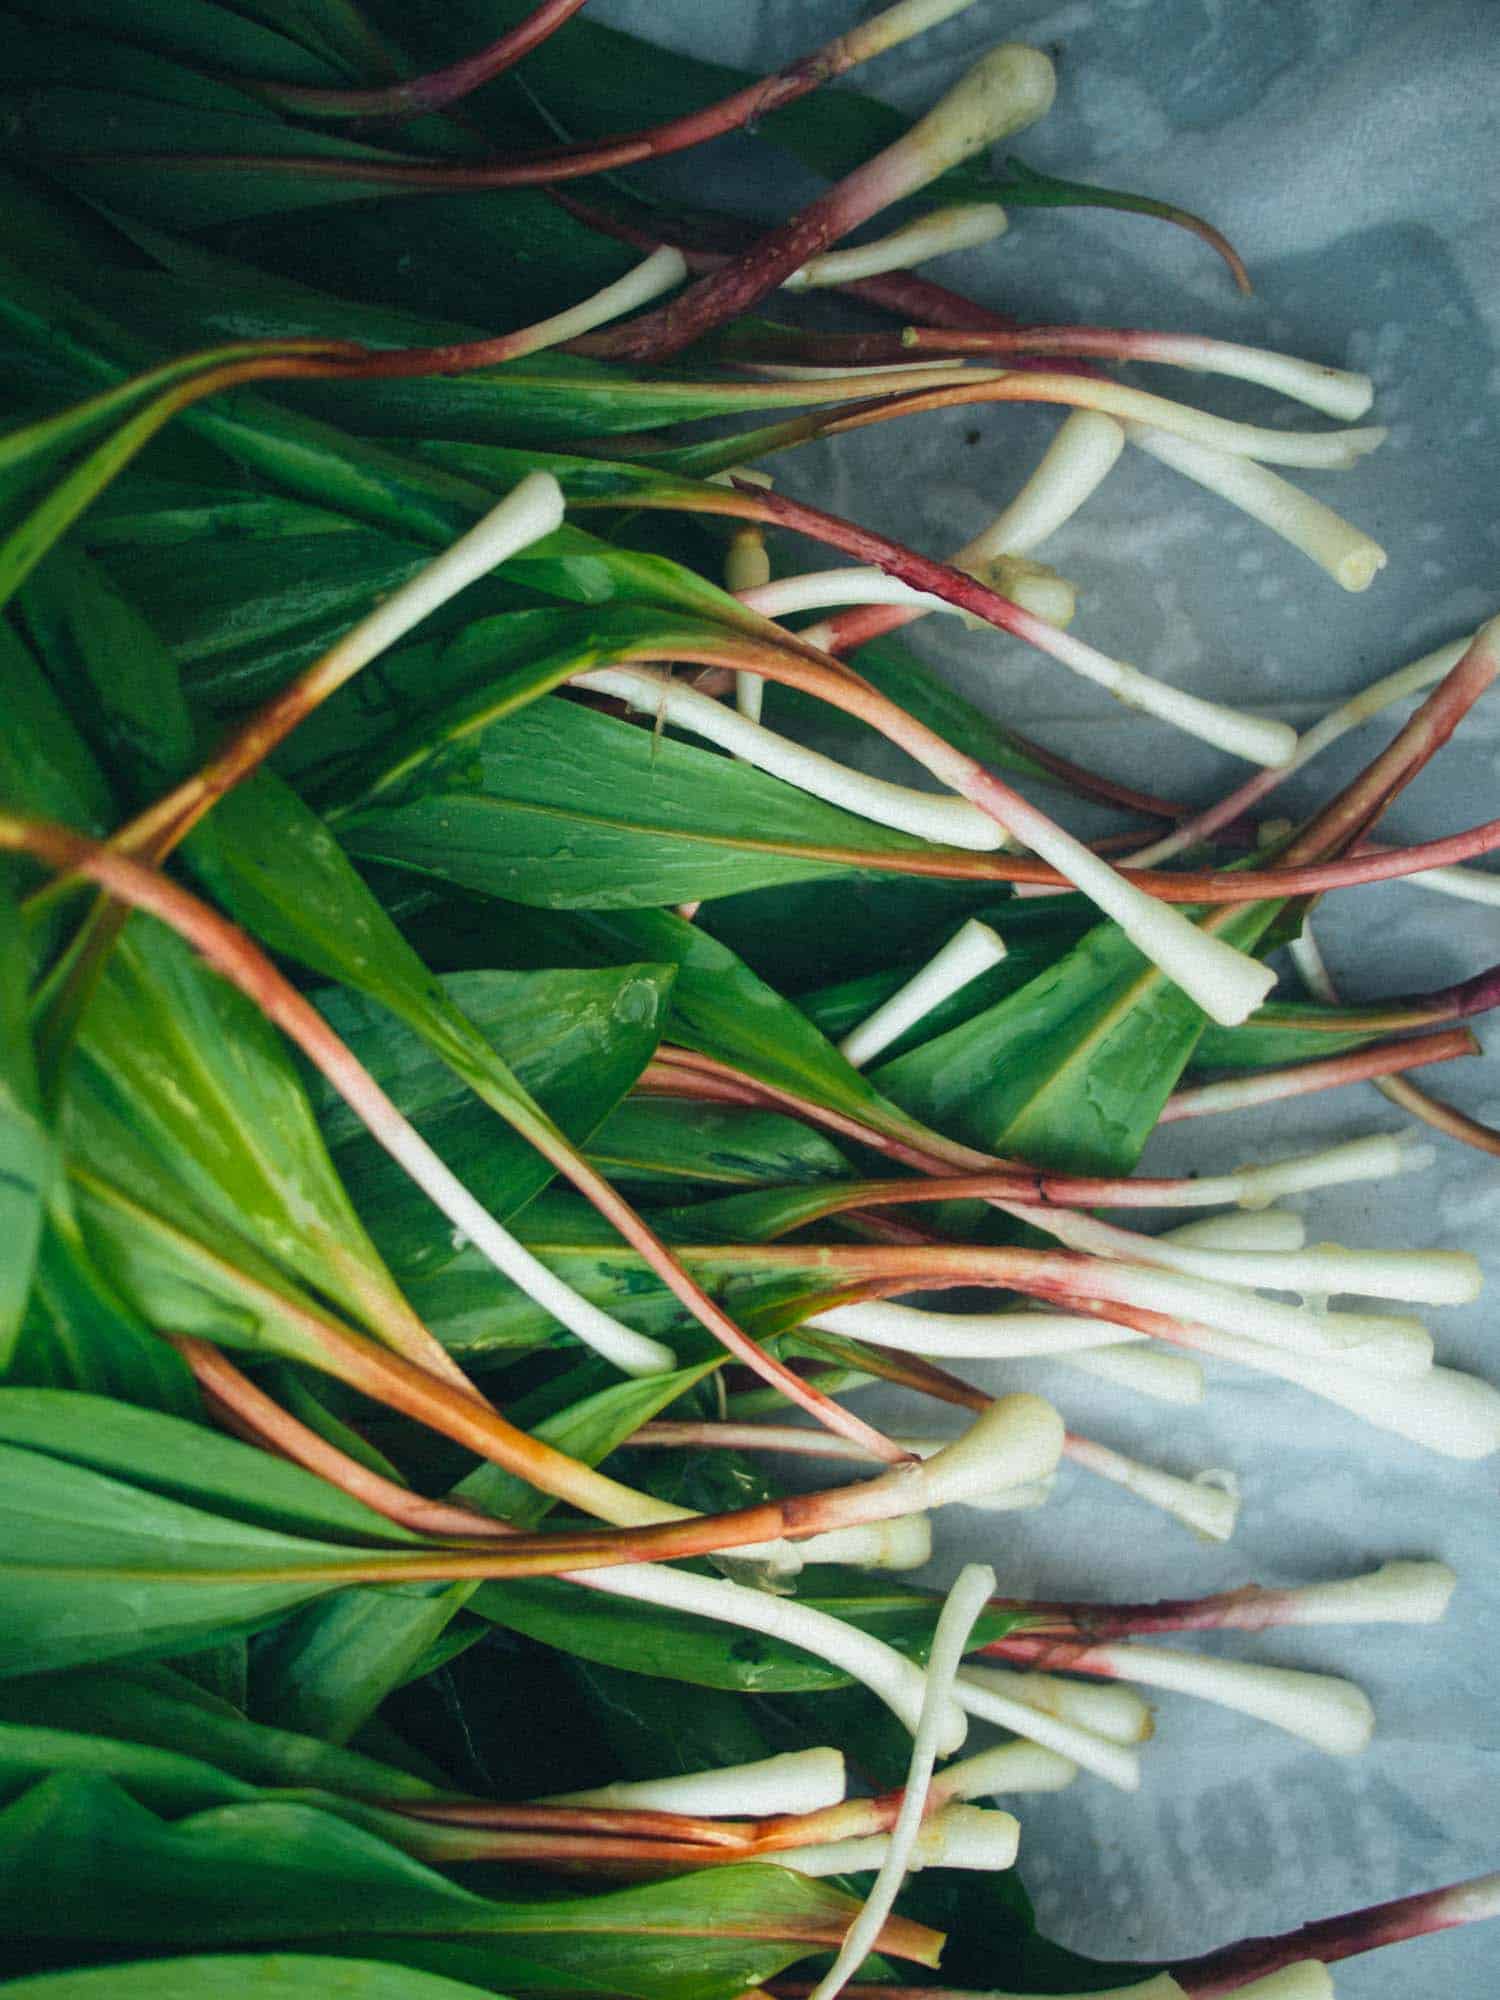 Pickled ramps are so easy to make and you can preserve the wild leek flavour all year long.